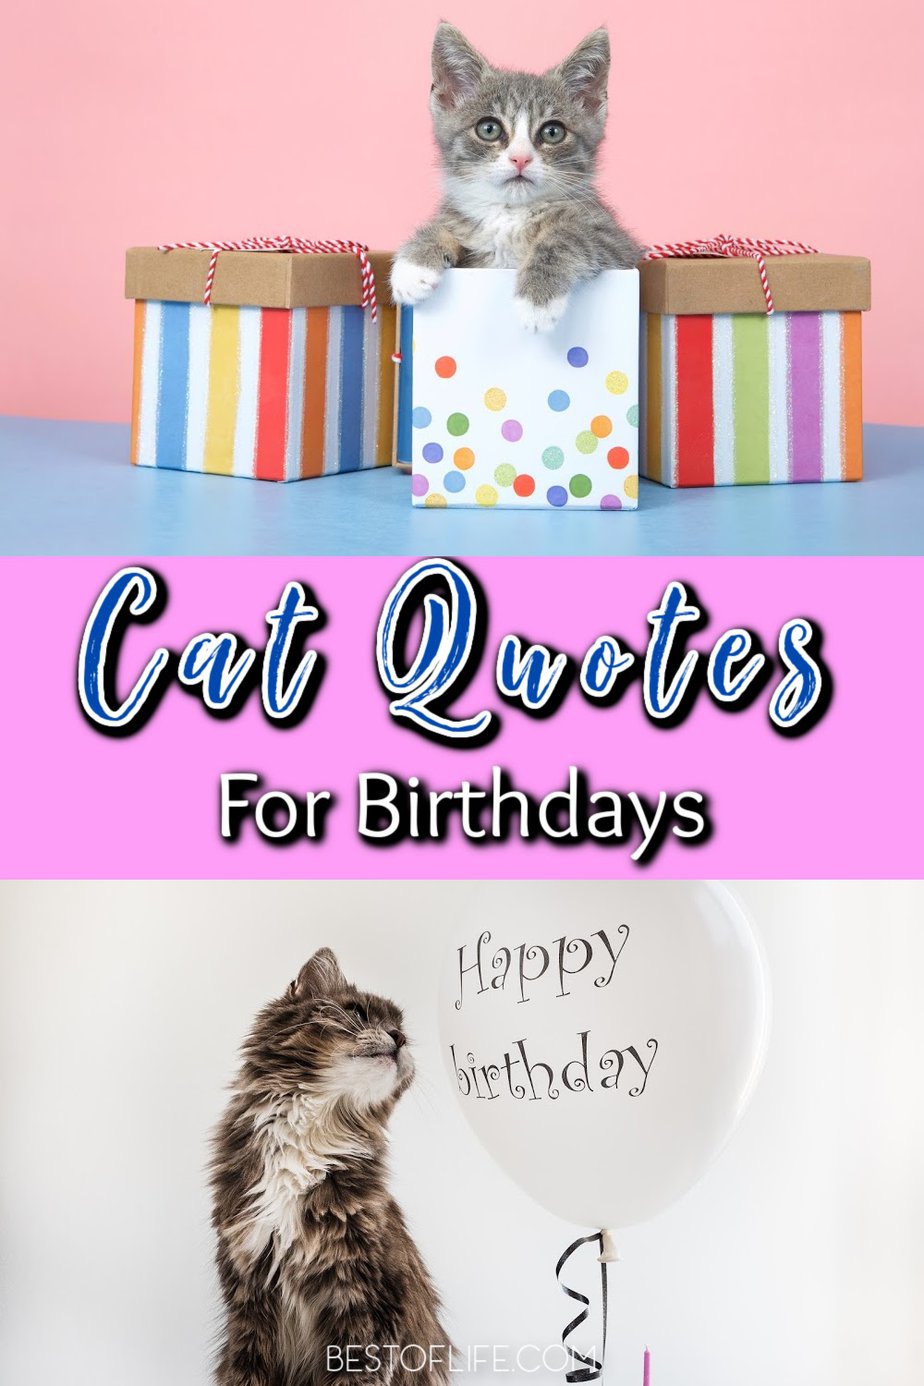 Cat Quotes for Birthdays - Best of Life